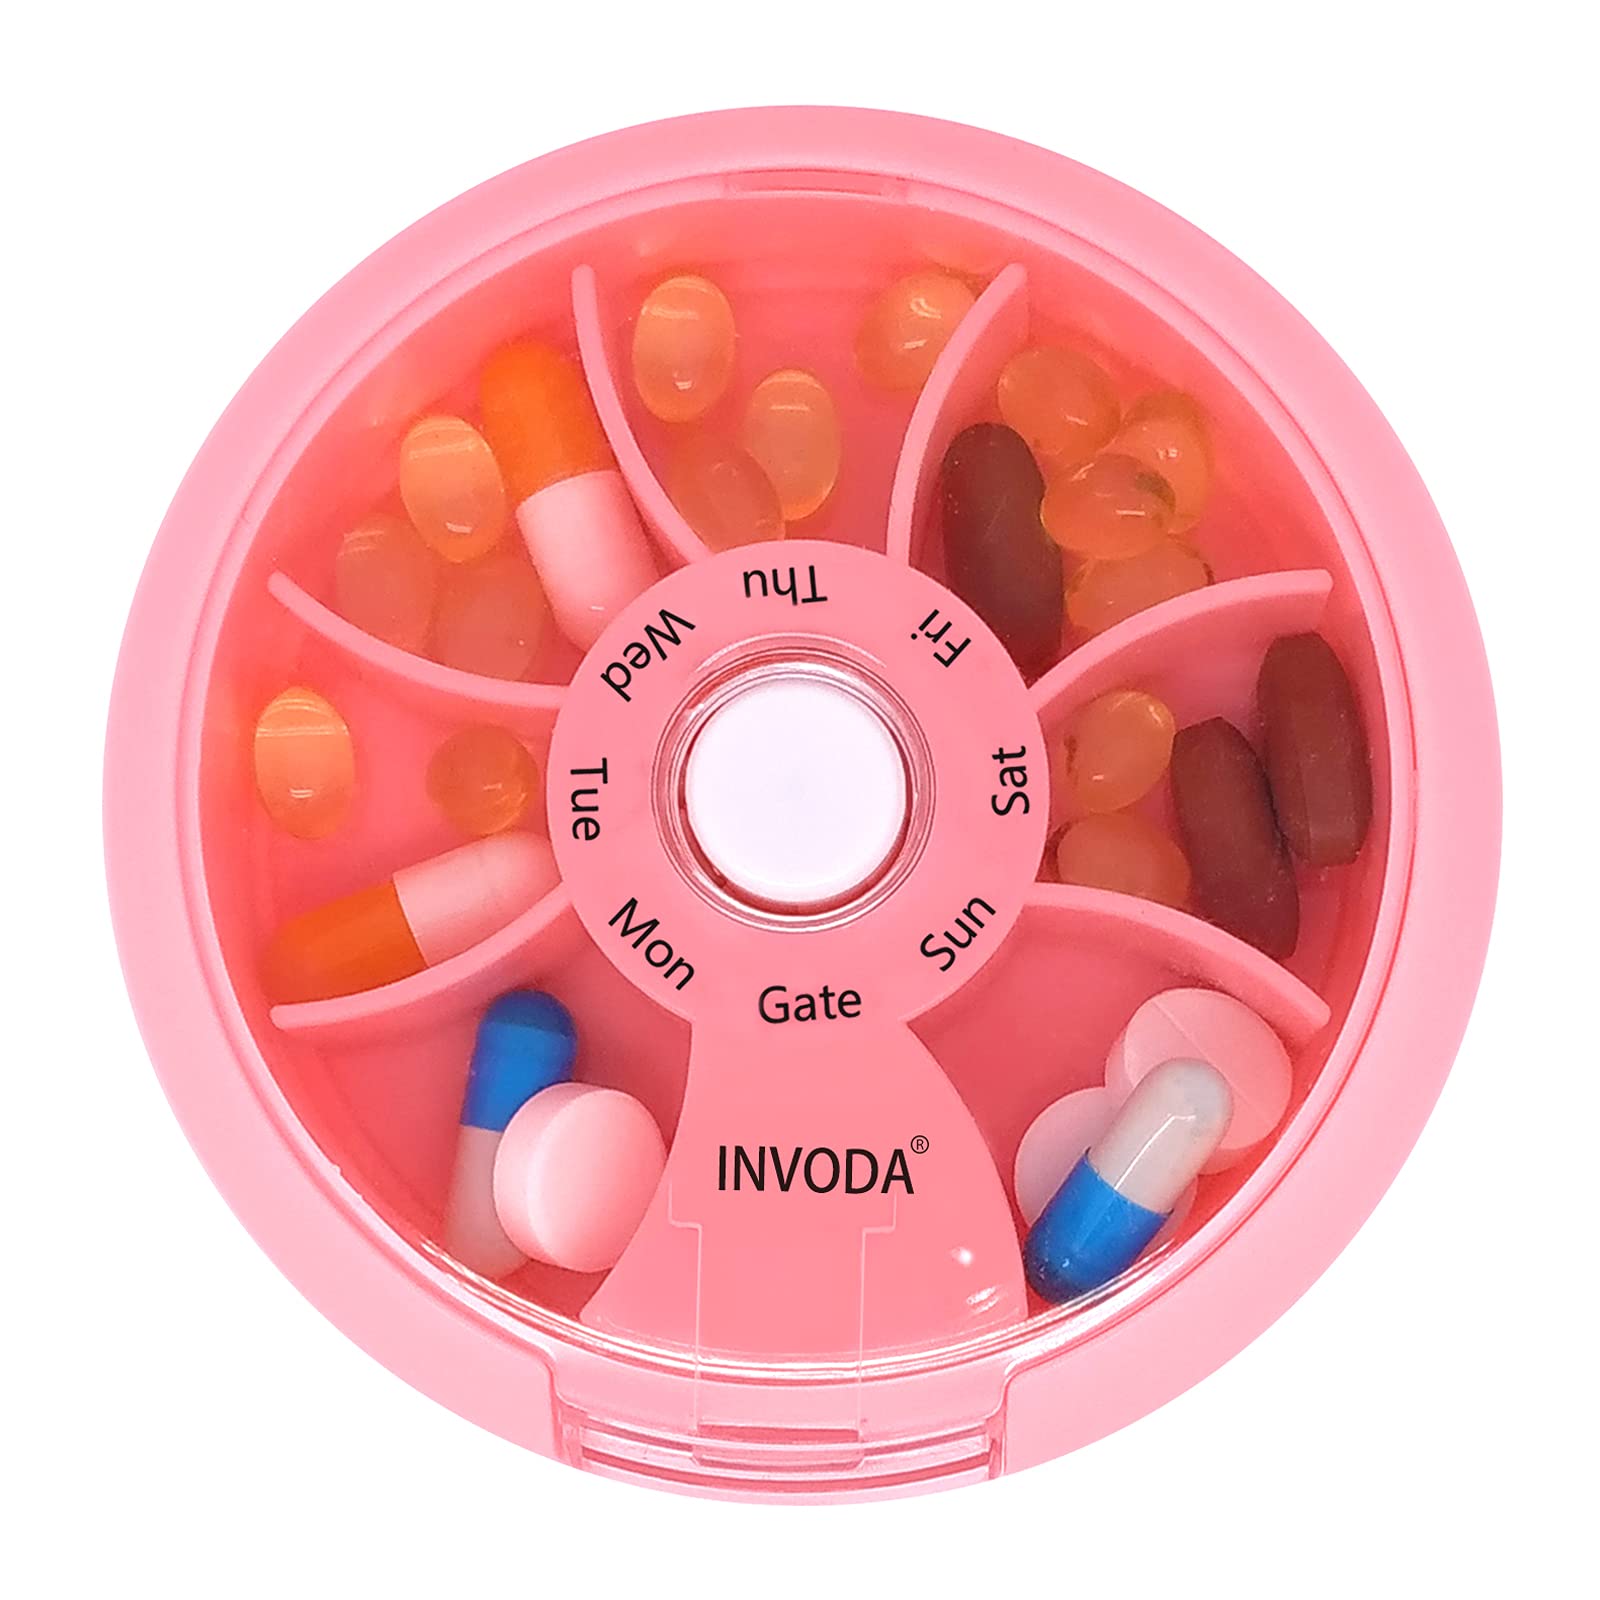 Pill Organizer Case, Weekly Floral Pill Box Compact Size for